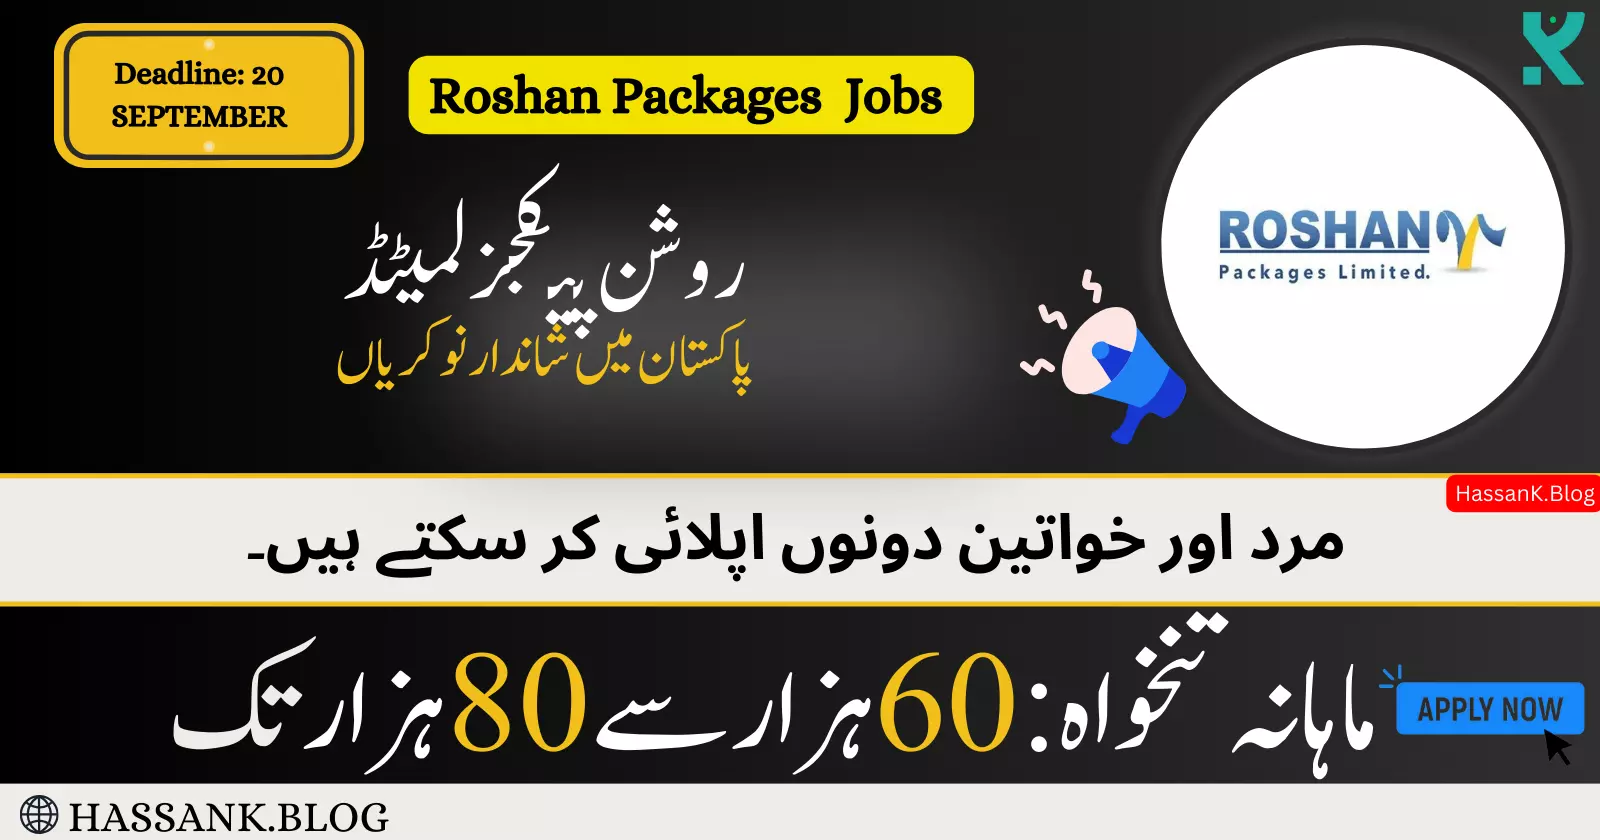 Roshan Packages Limited